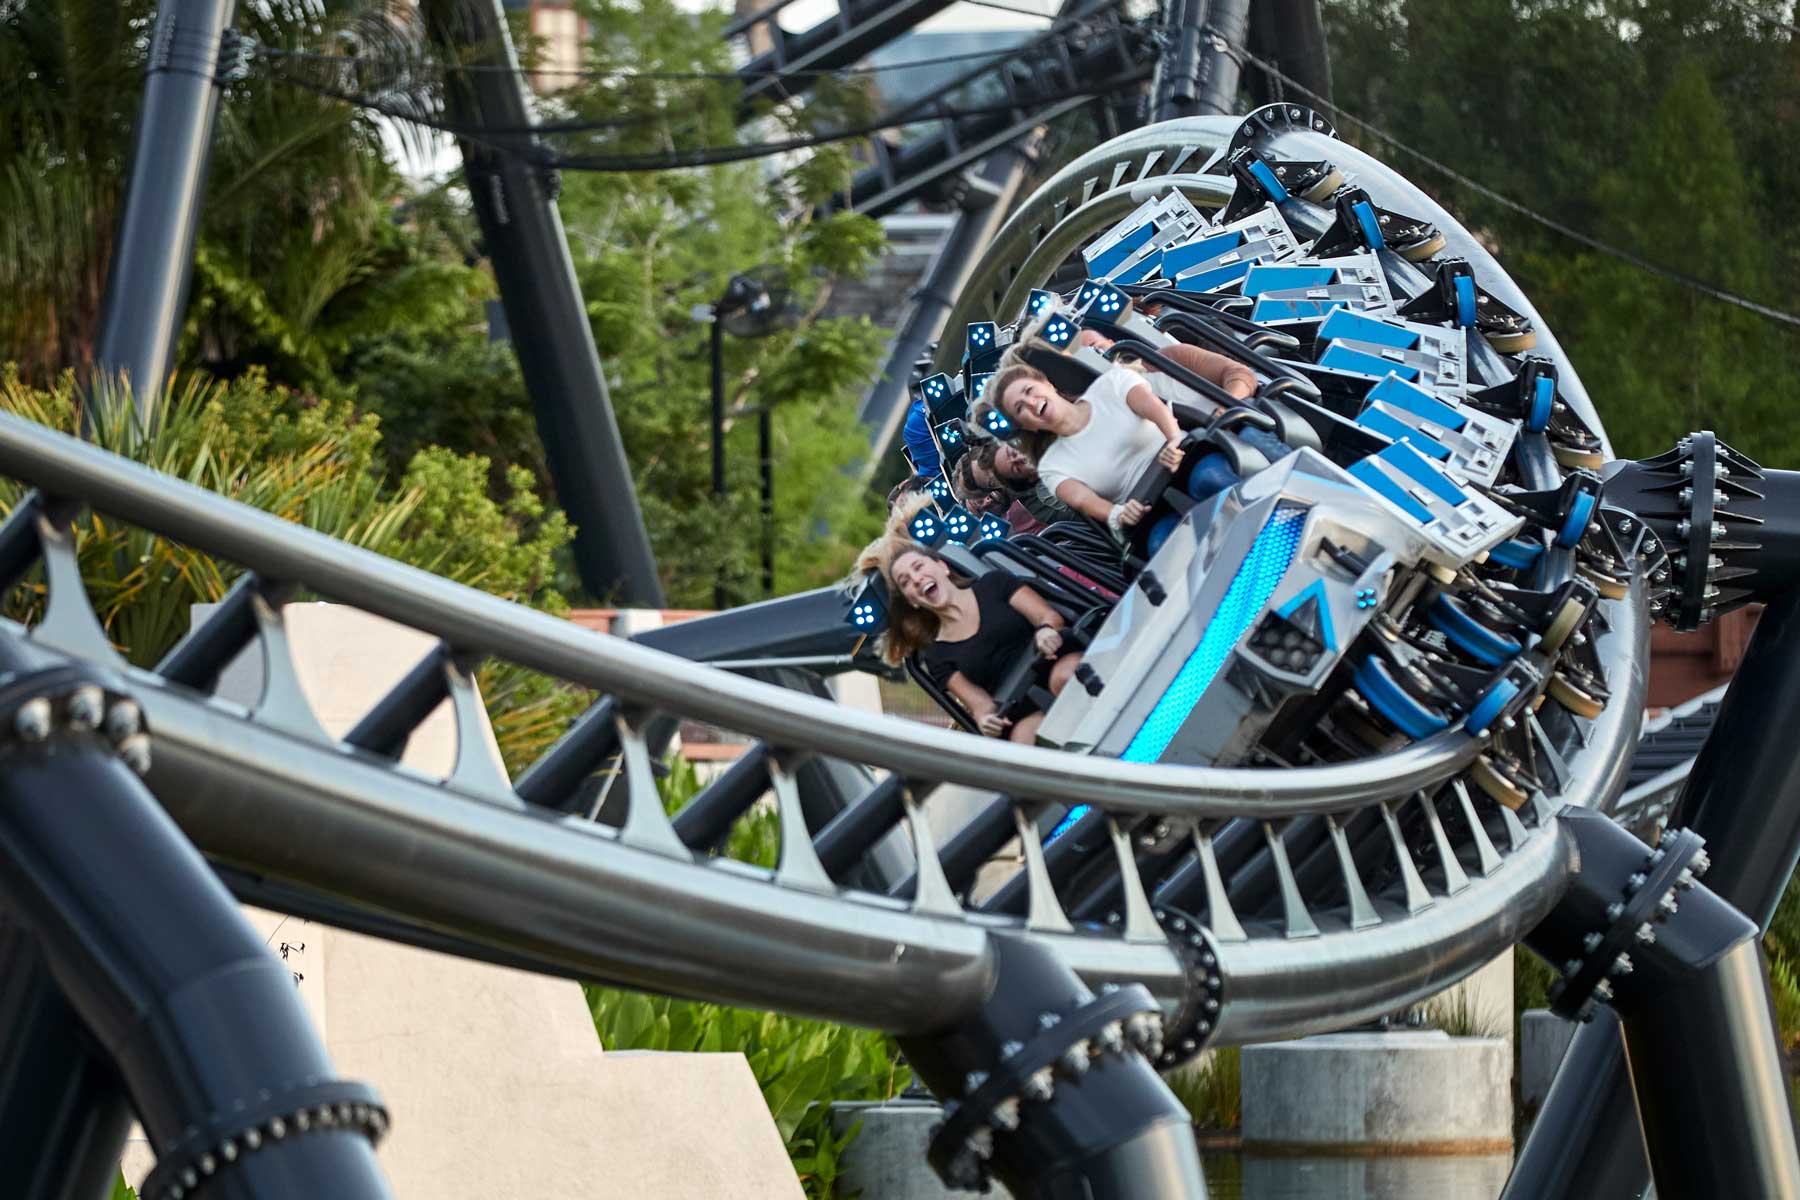 Guests riding a rollercoaster